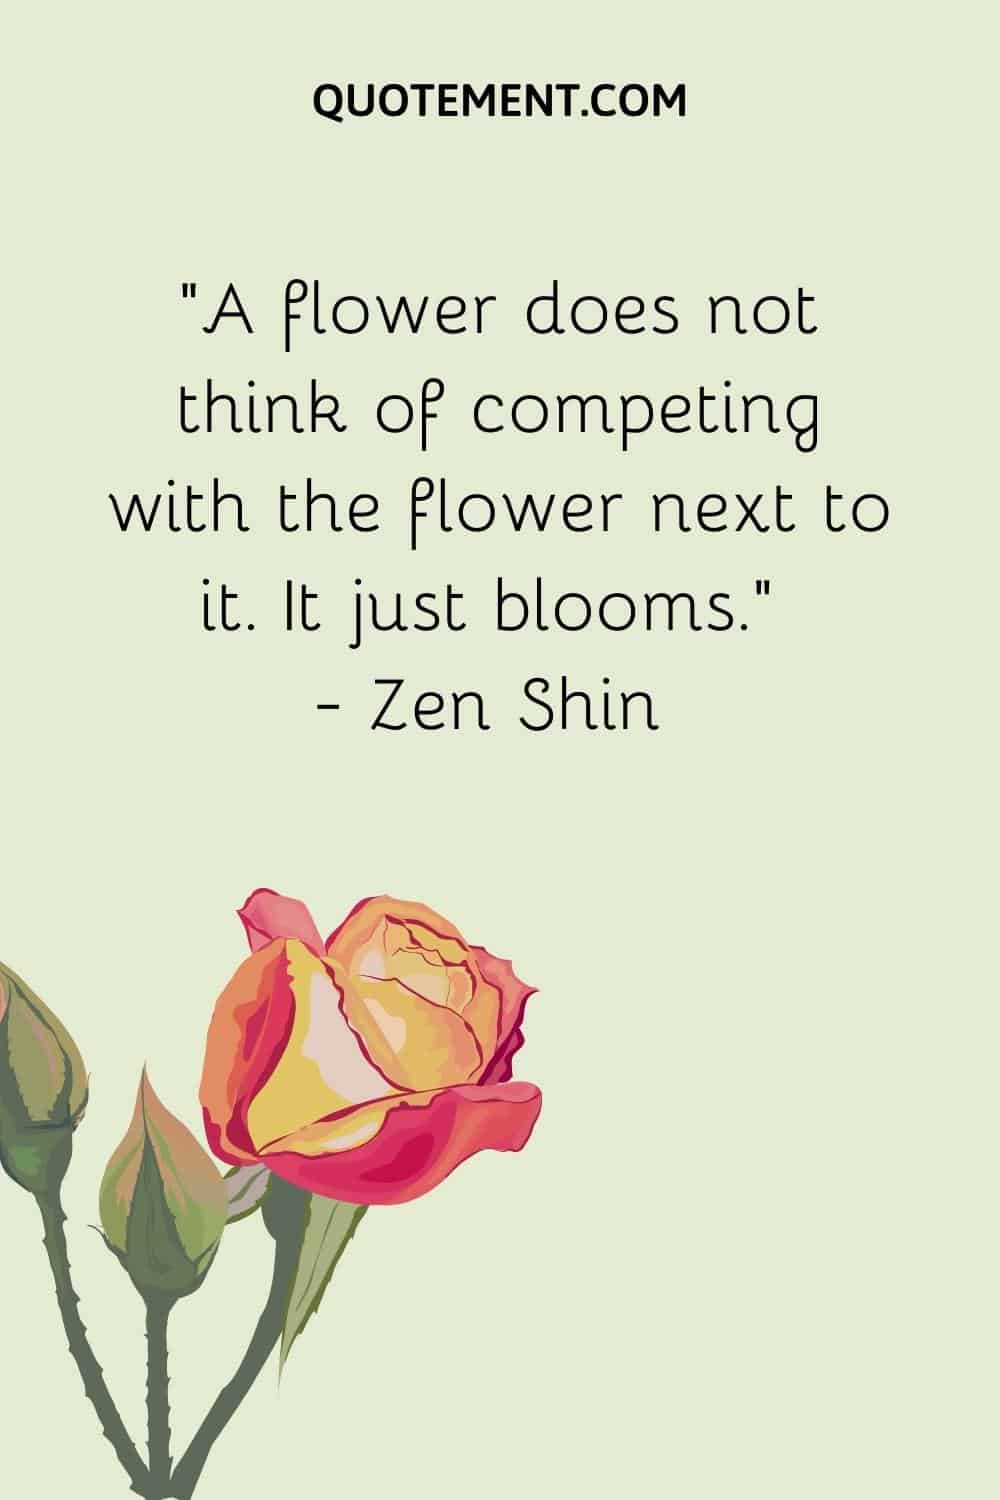 “A flower does not think of competing with the flower next to it. It just blooms.” — Zen Shin